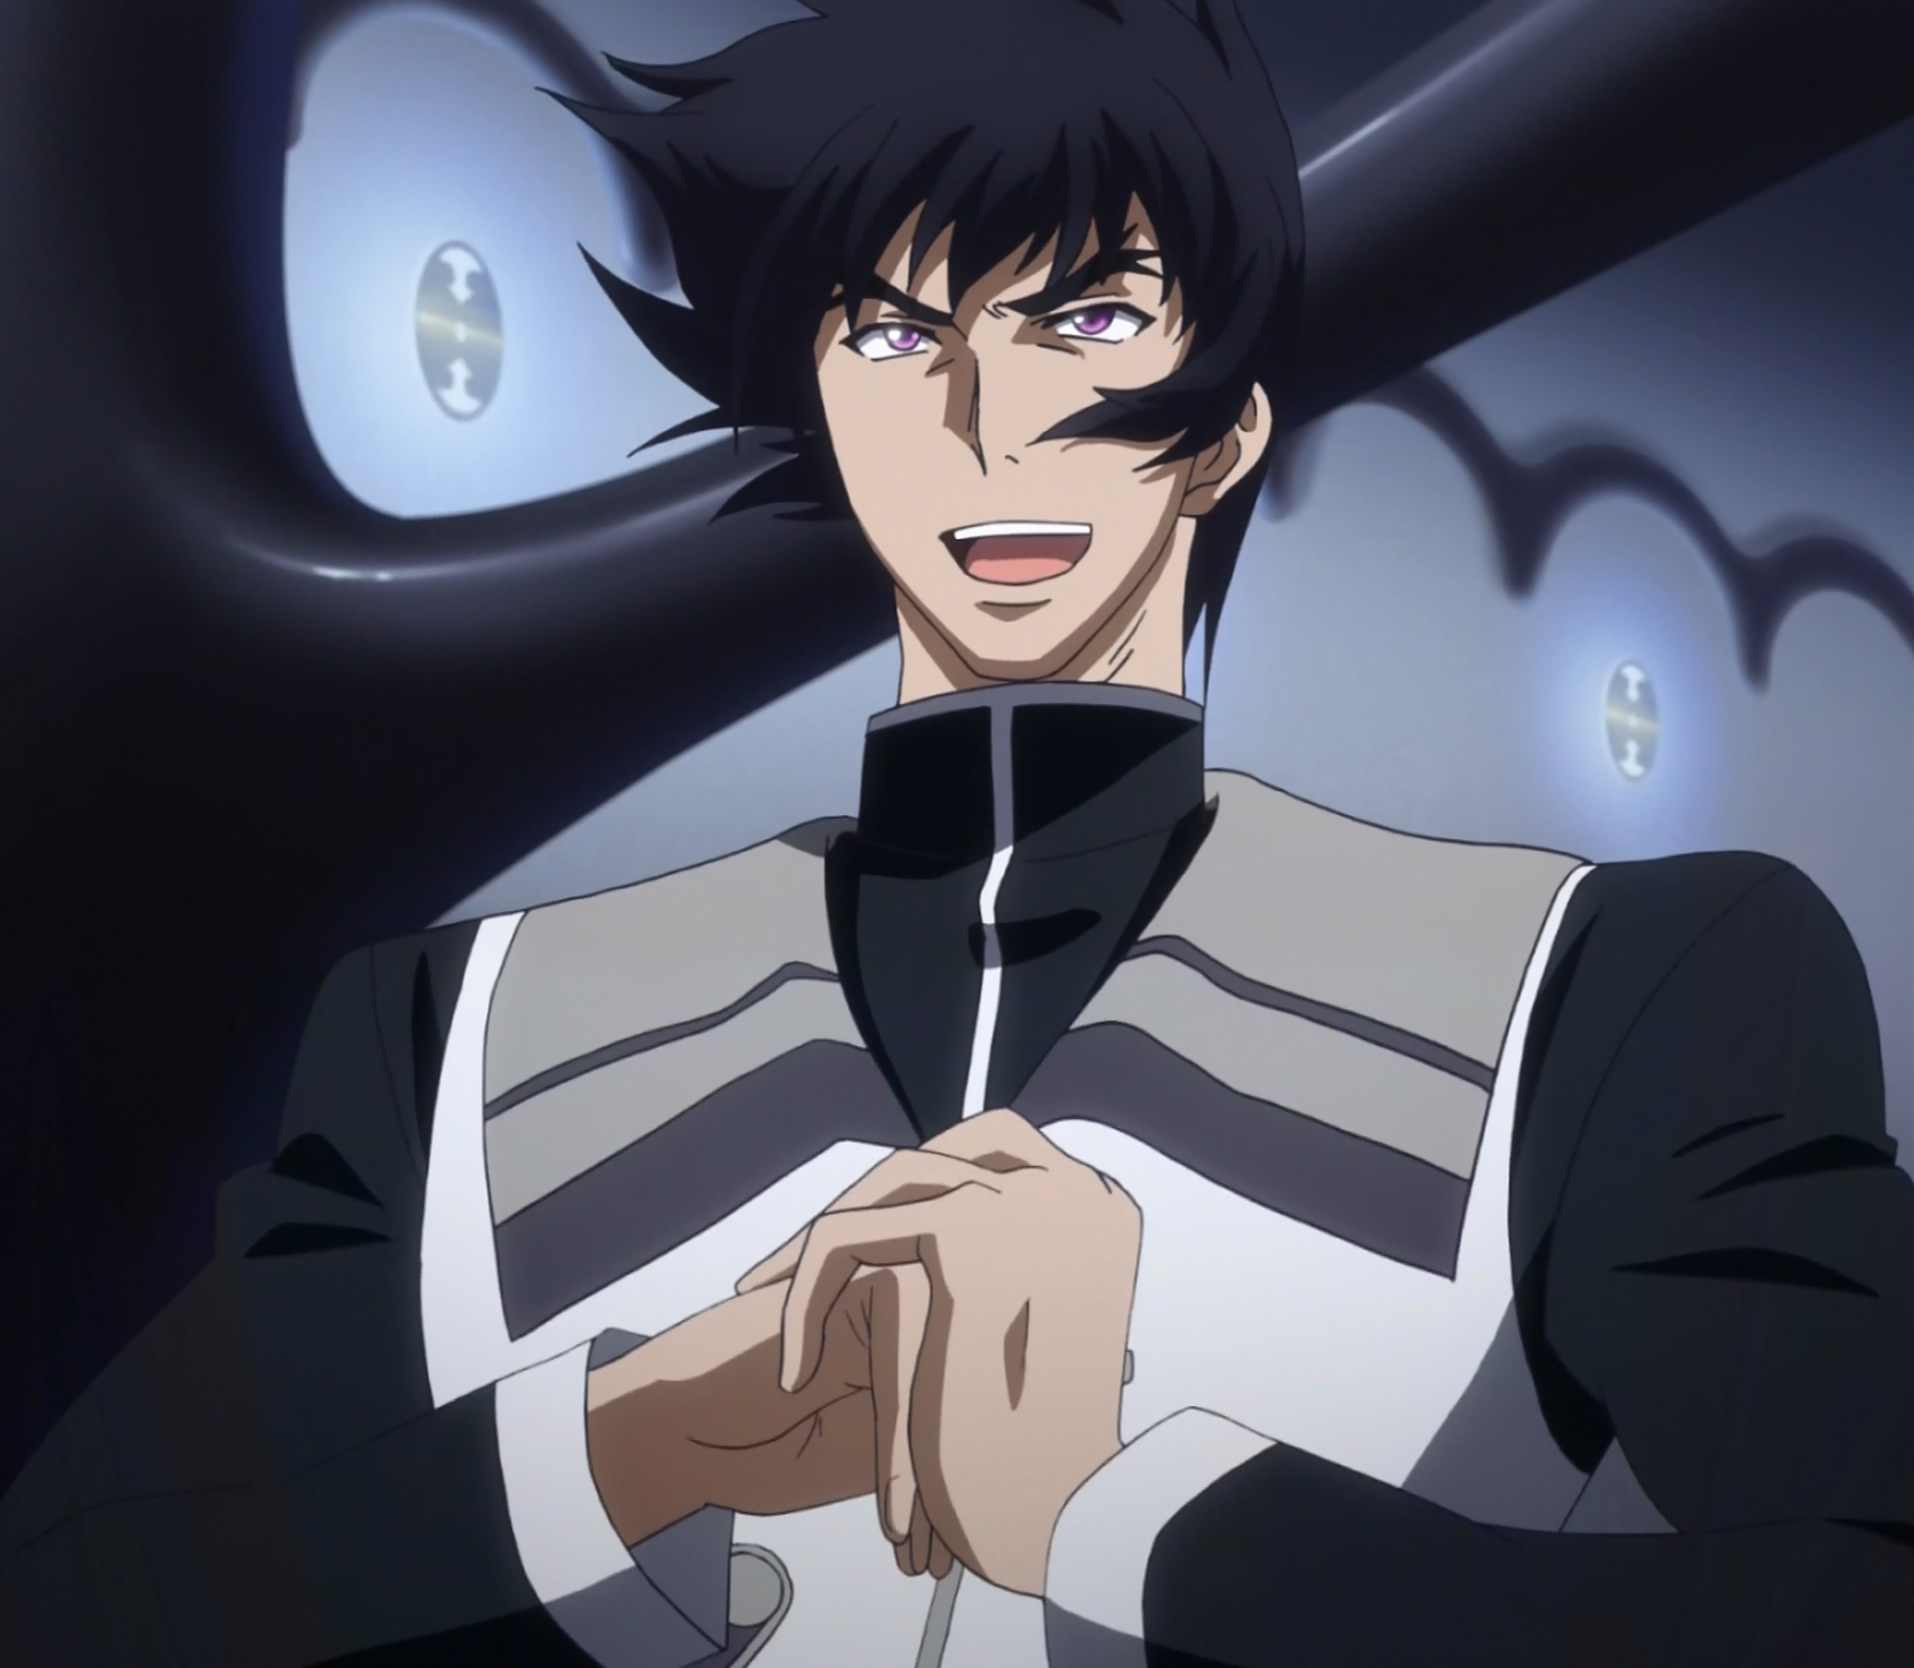 A Belial's Adventure in DXD